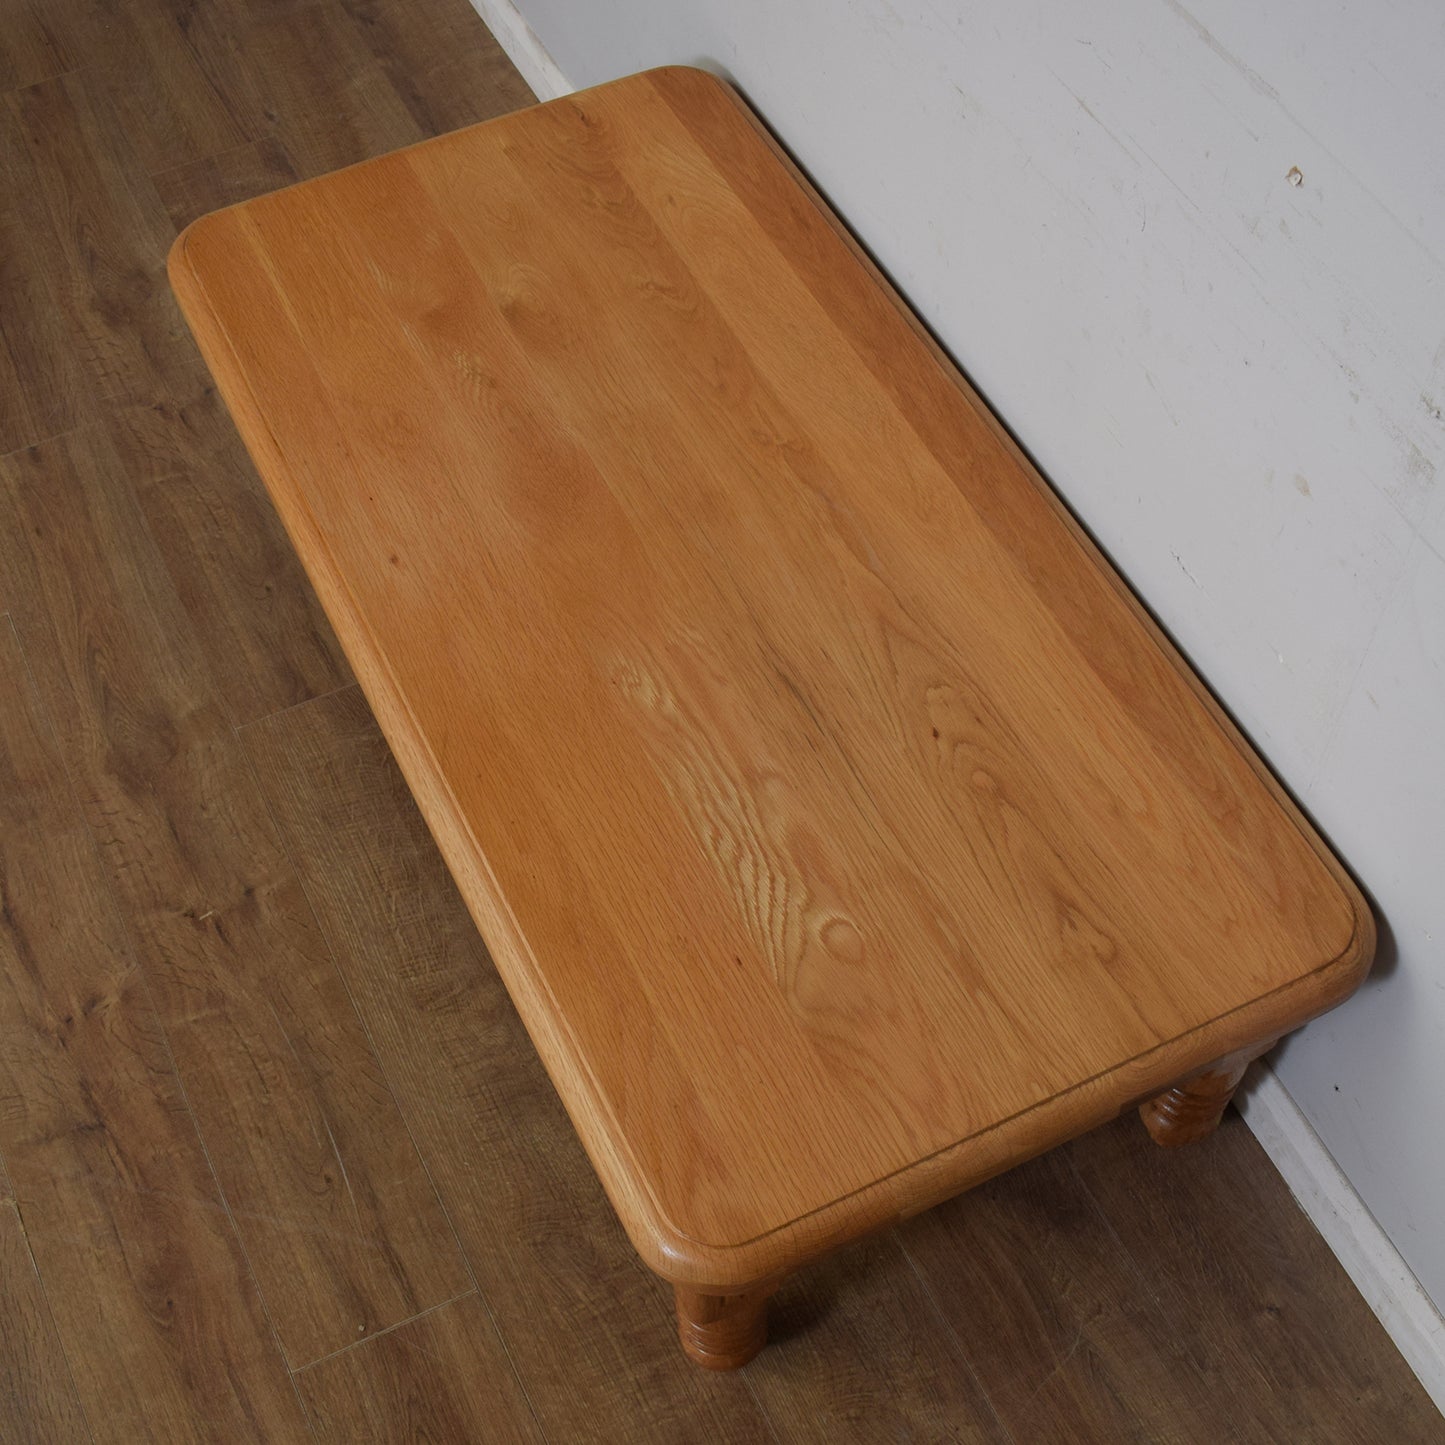 Large Solid Oak Coffee Table